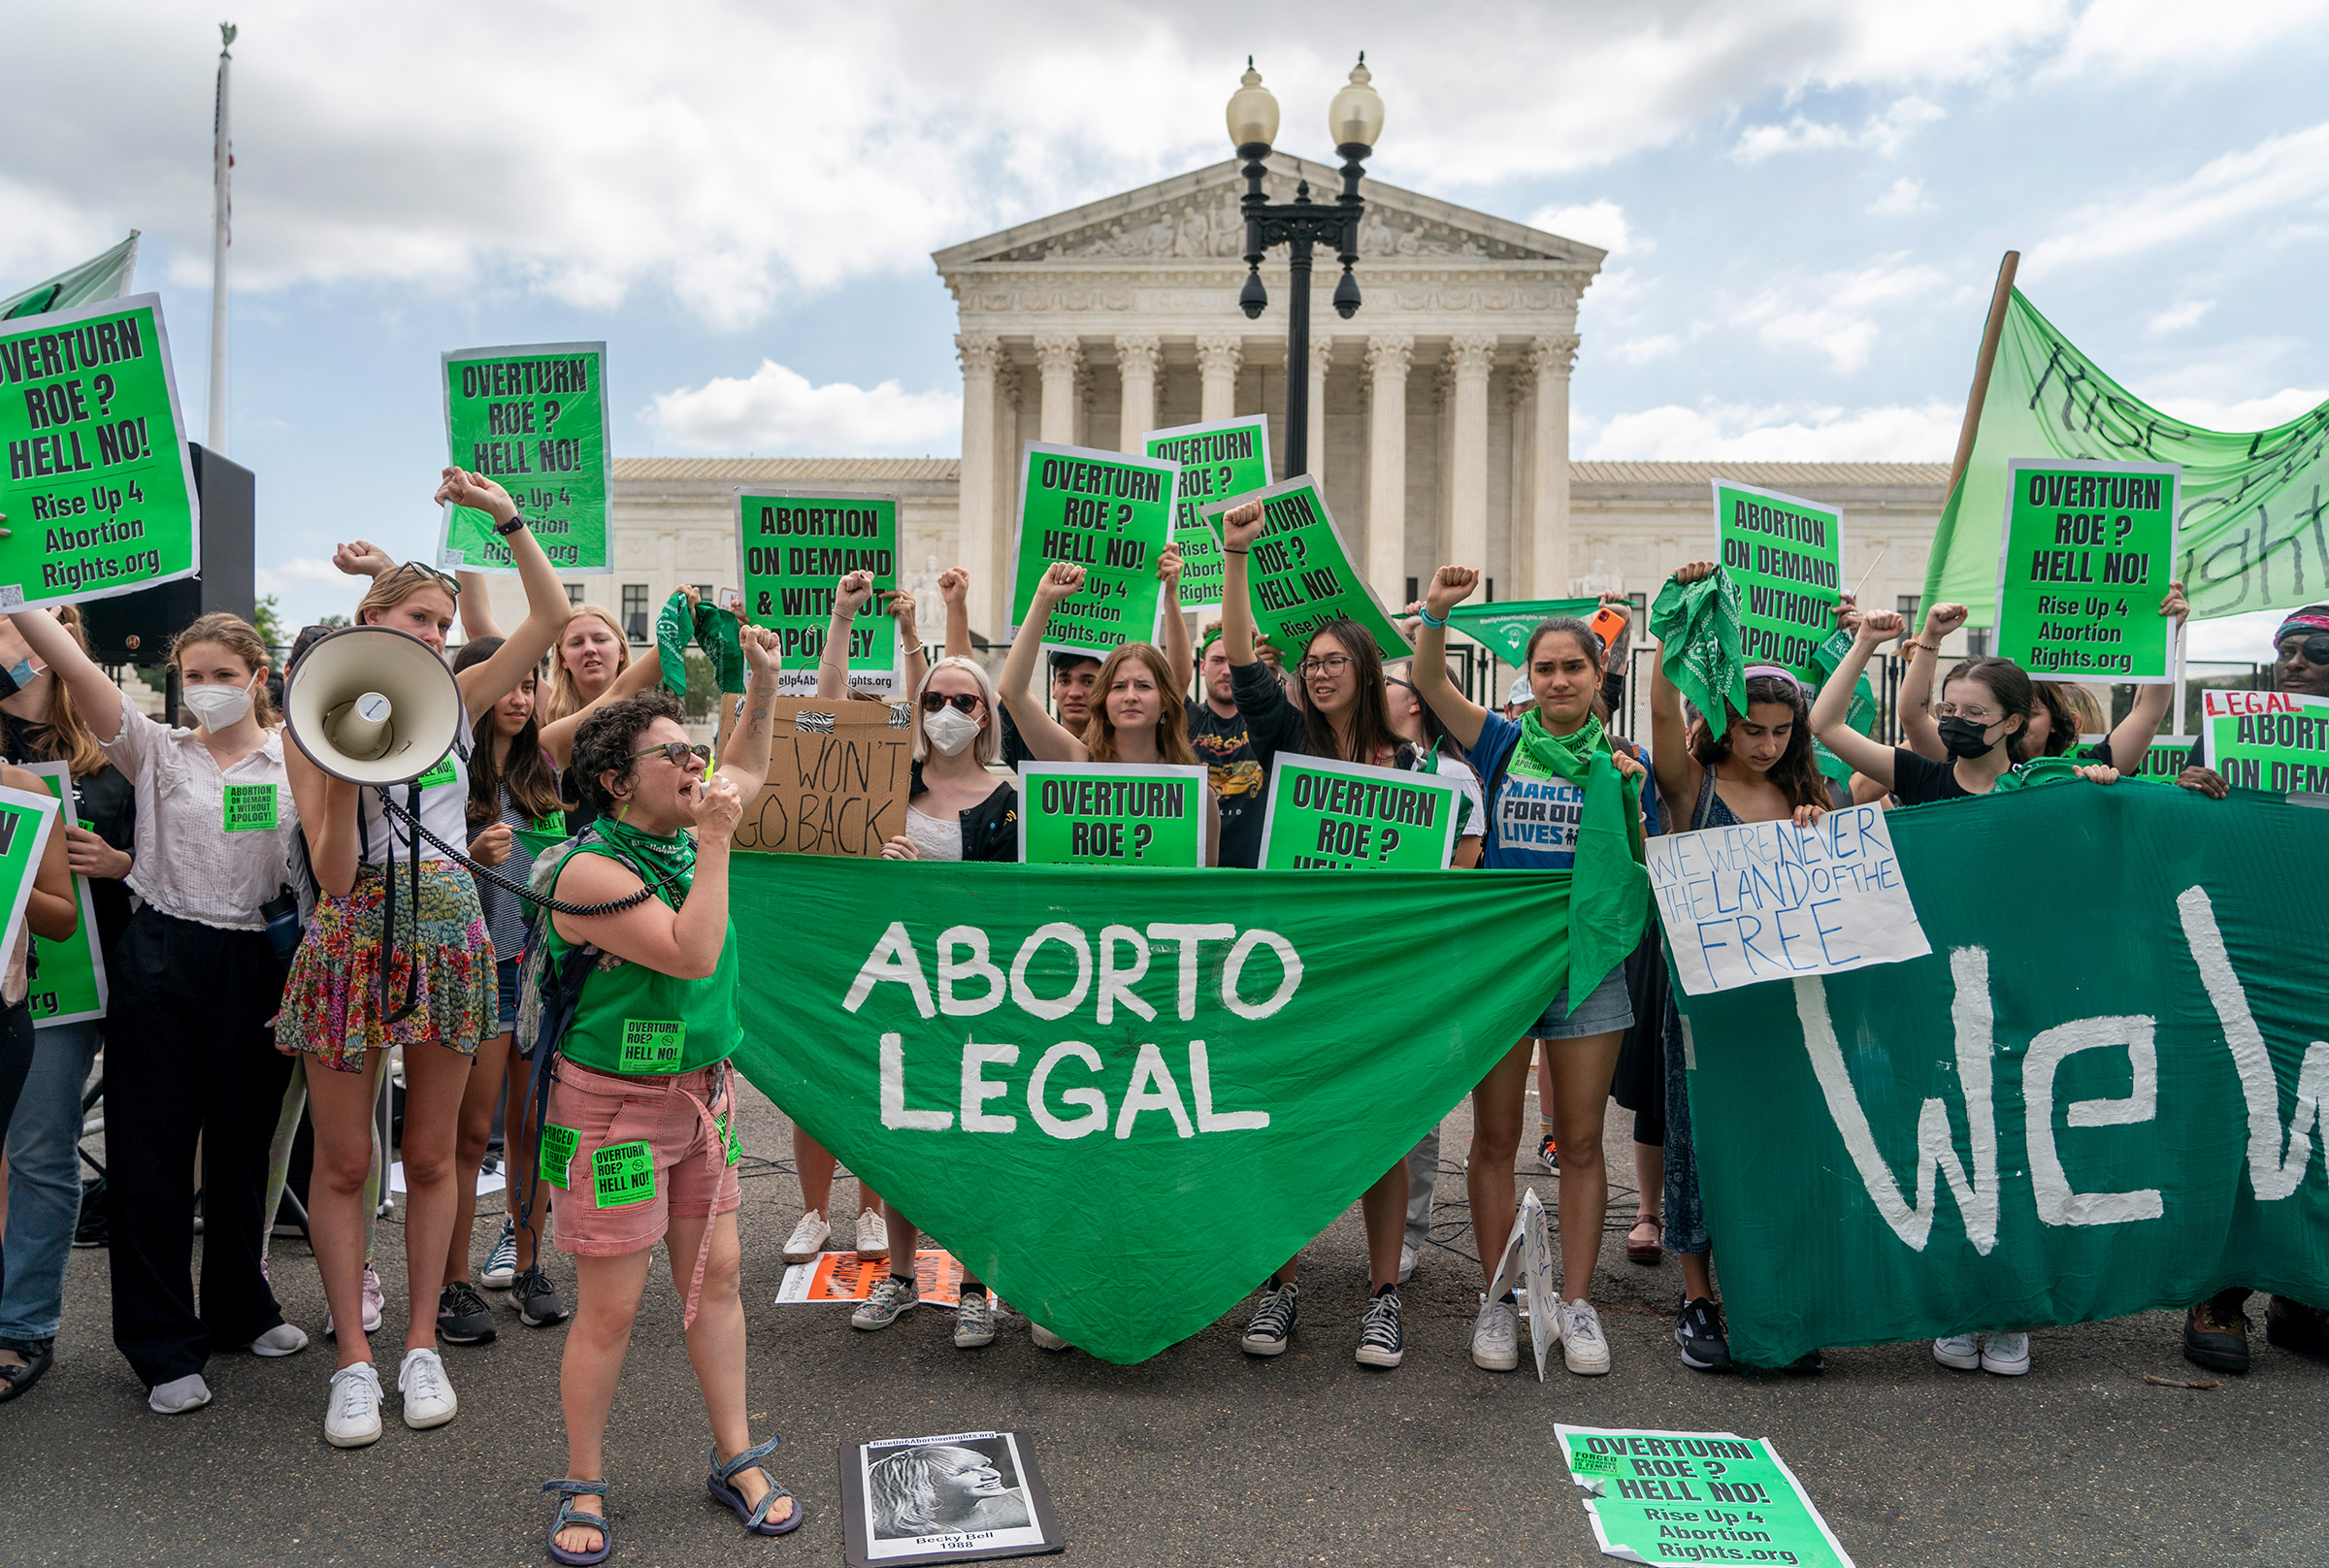 Abortion-rights protesters gather outside the Supreme court in Washington, D.C., following the court's decision to overturn Roe v. Wade, on June 24, 2022. (Gemunu Amarasinghe—AP)